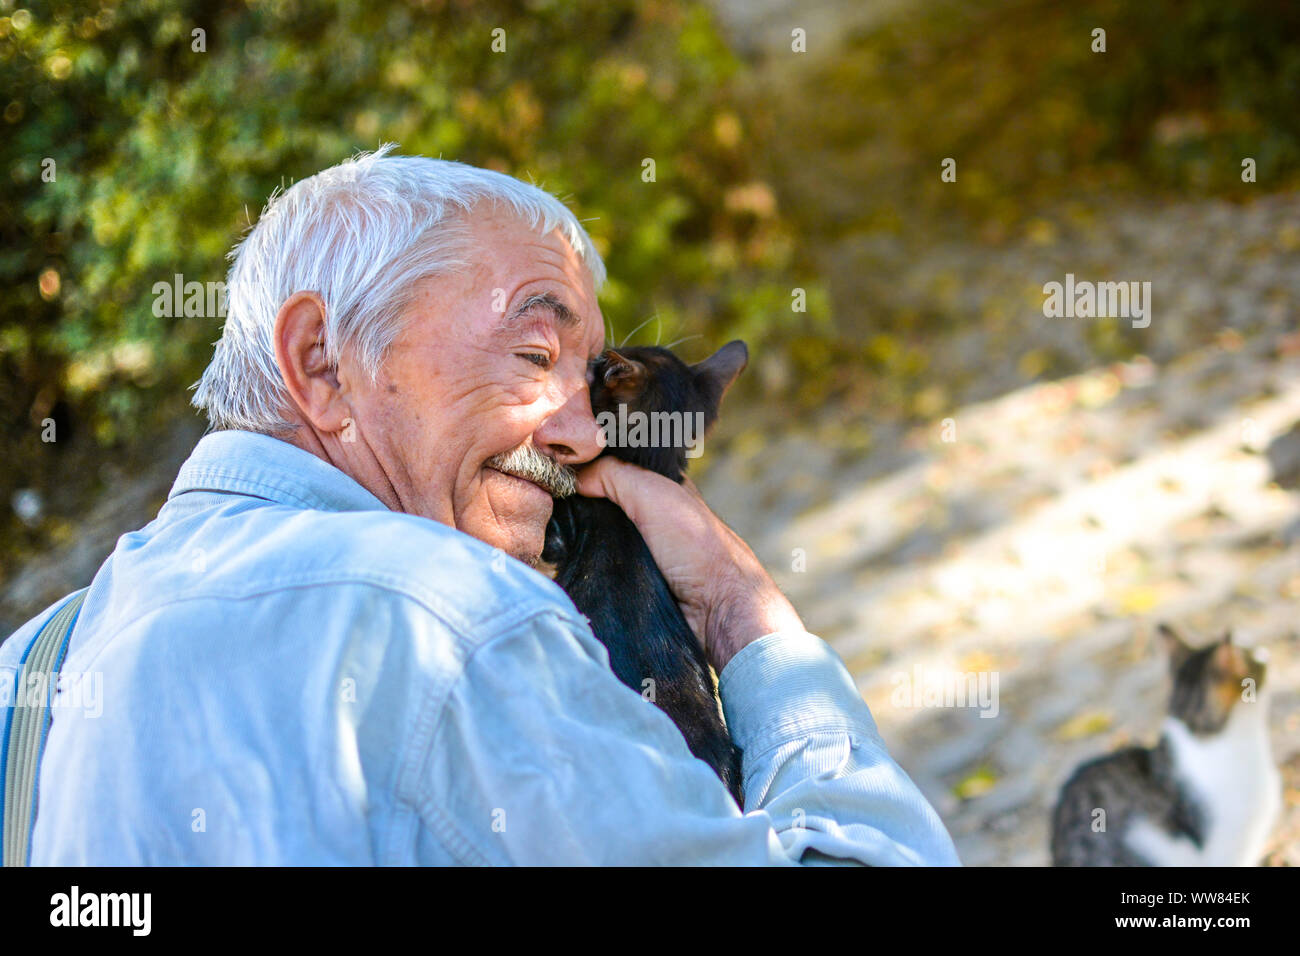 Croatian man who donates his time and resources to taking care of the stray cats of Split Croatia holds a black kitten up to his face at a shelter Stock Photo